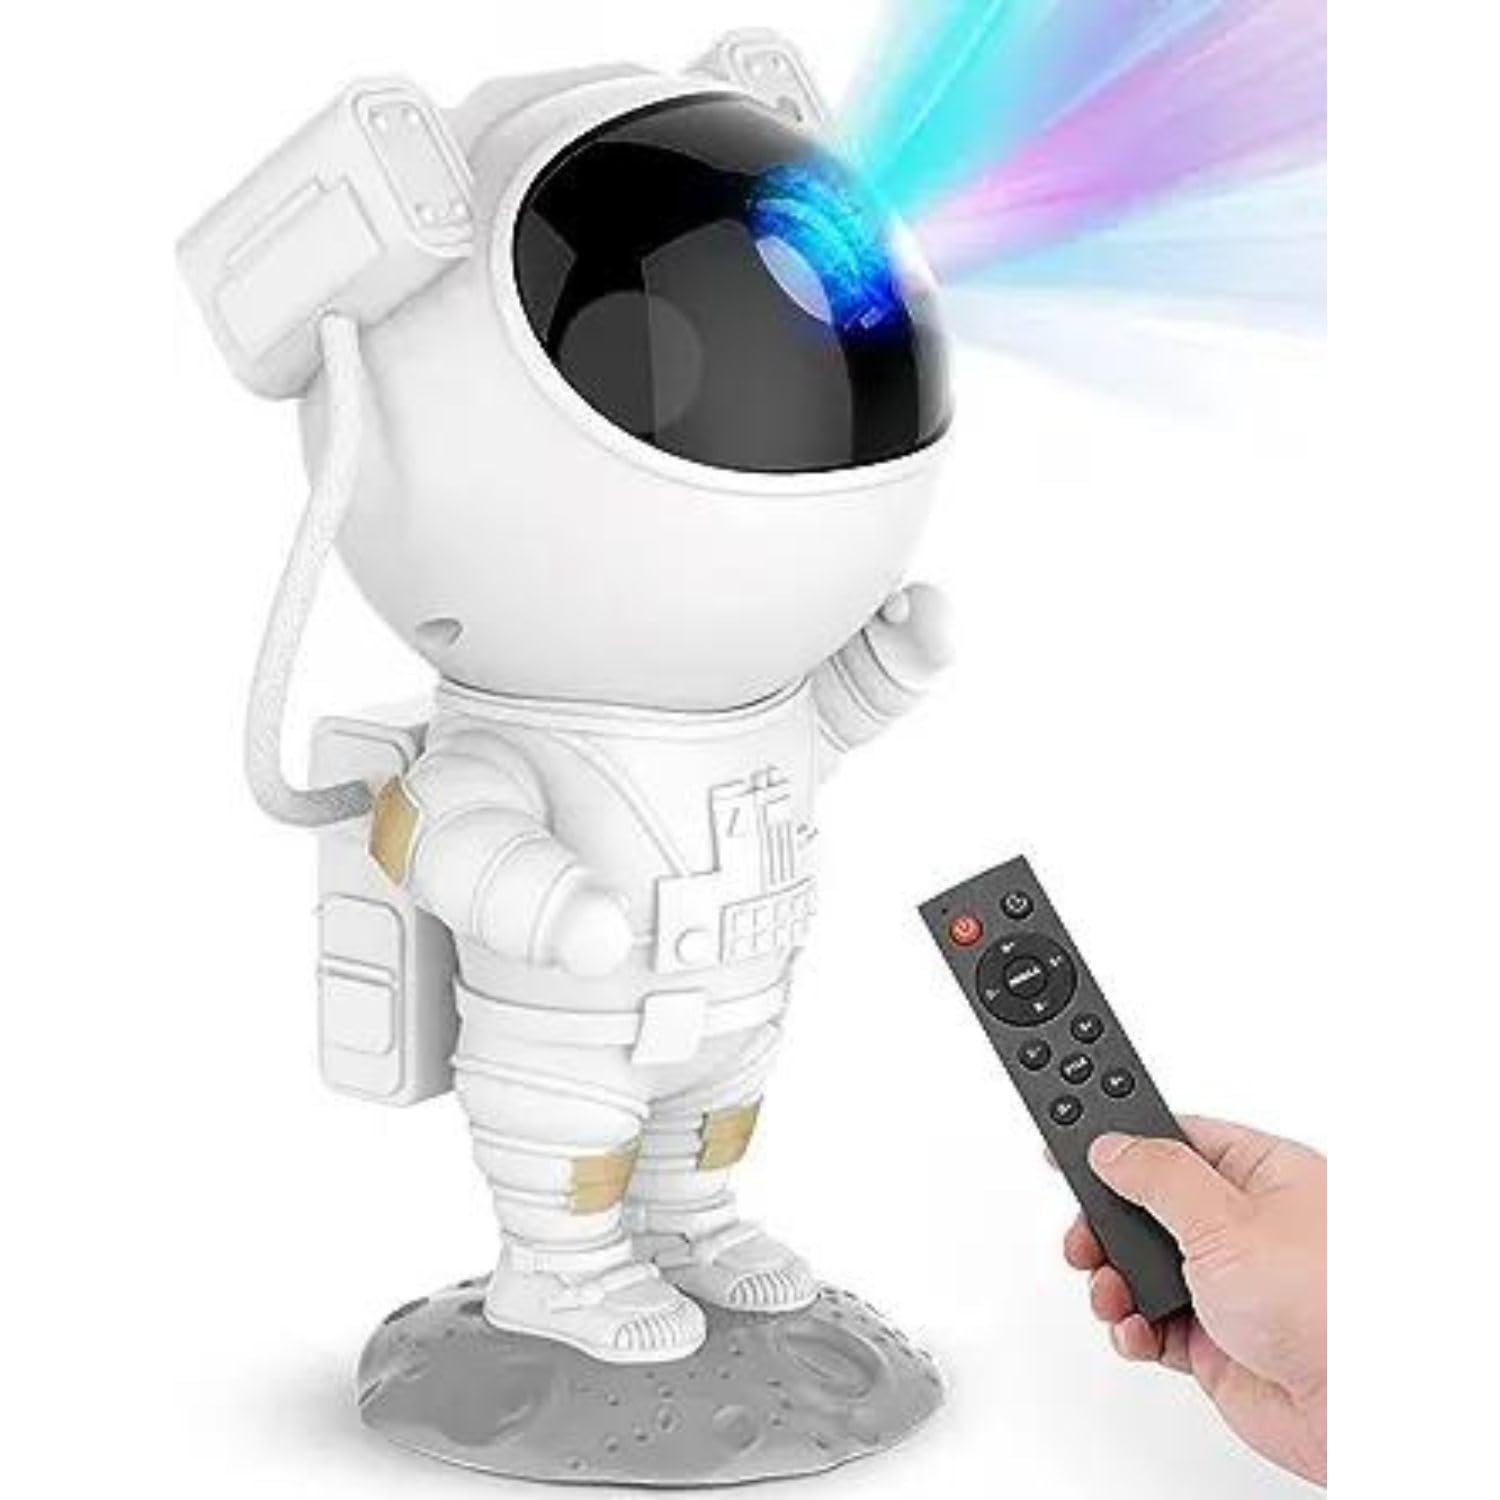 Astronaut 360 Galaxy St Projector with Timer Remote & Magnetic Face | Nebula Stars Northern Aurora Light Projector for Room Decor